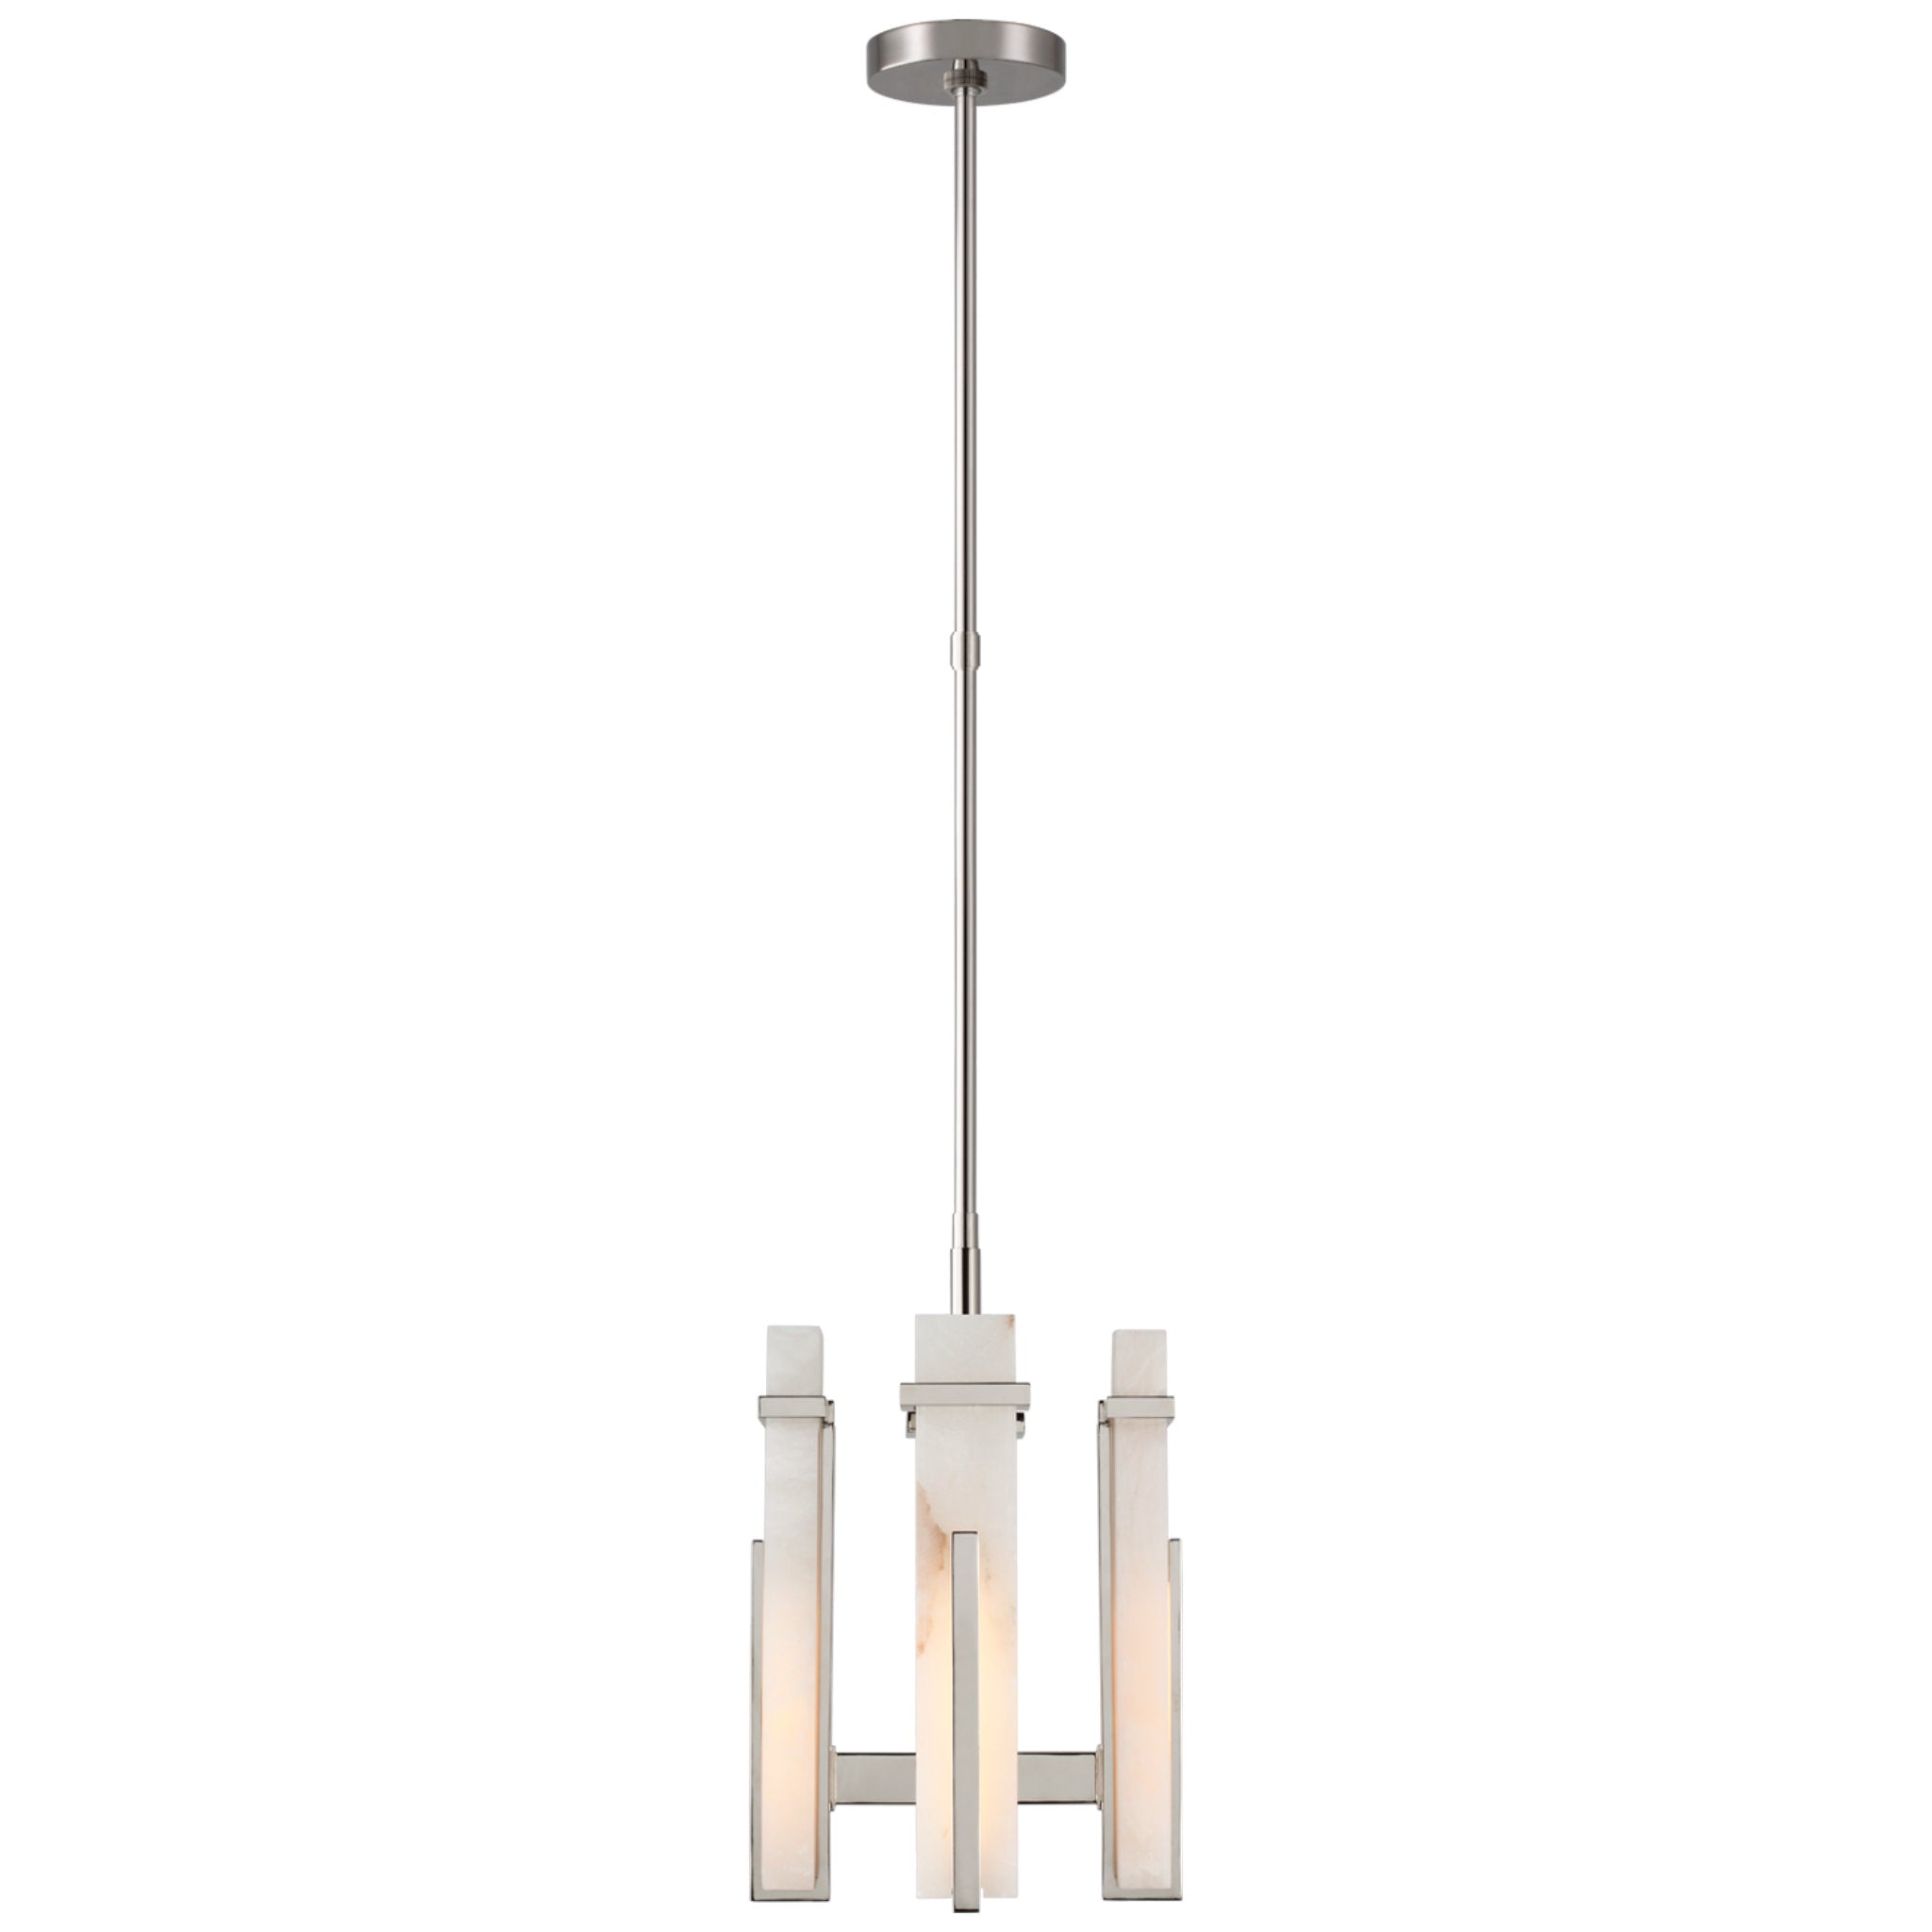 Ian K. Fowler Malik Small Chandelier in Polished Nickel with Alabaster